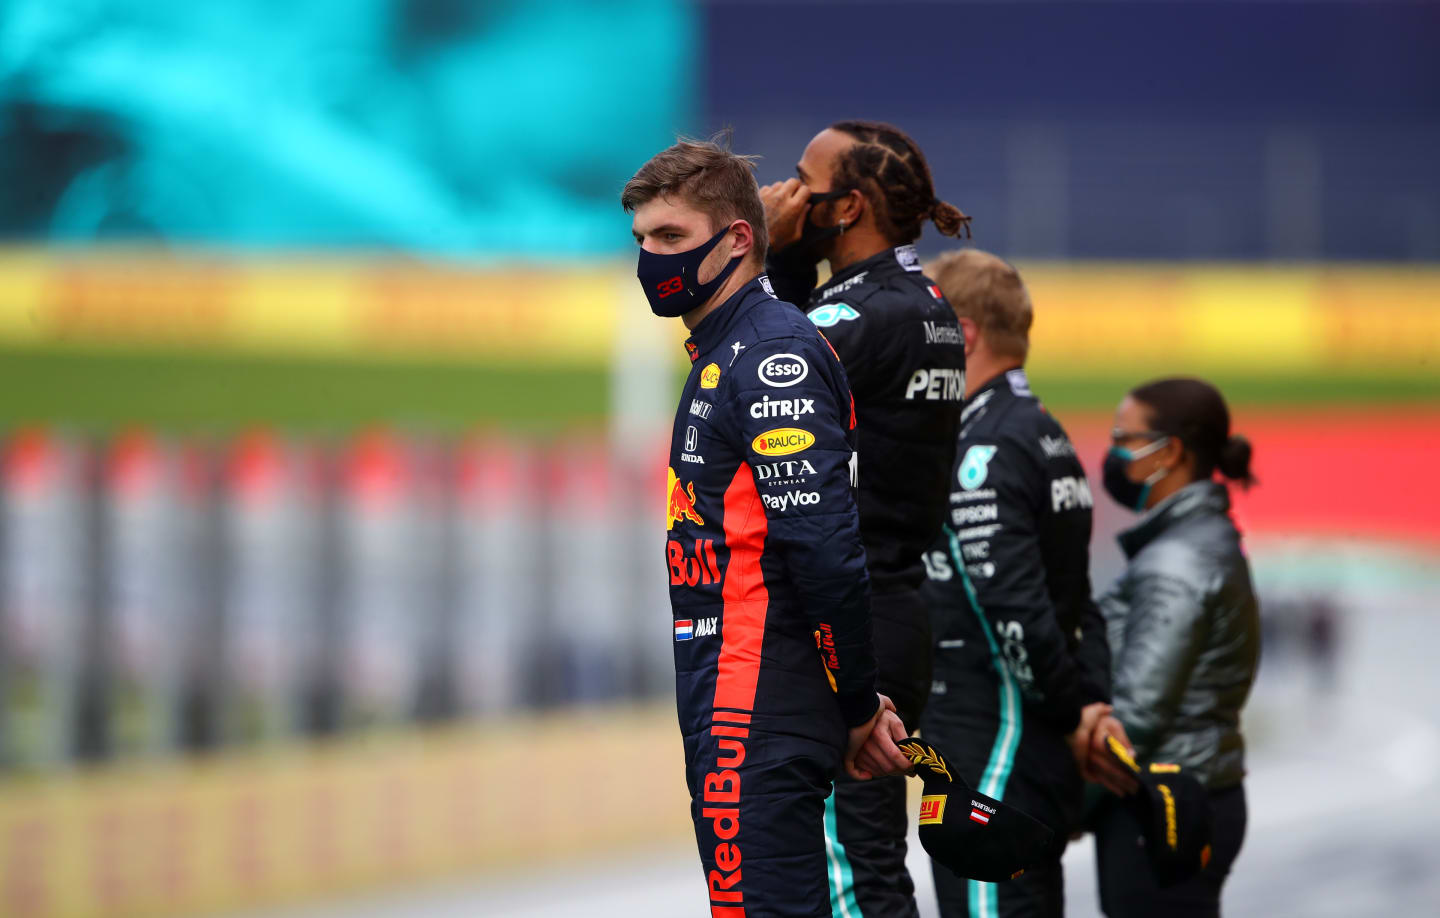 SPIELBERG, AUSTRIA - JULY 12: Second placed Max Verstappen of Netherlands and Red Bull Racing looks on from the podium during the Formula One Grand Prix of Styria at Red Bull Ring on July 12, 2020 in Spielberg, Austria. (Photo by Bryn Lennon/Getty Images)